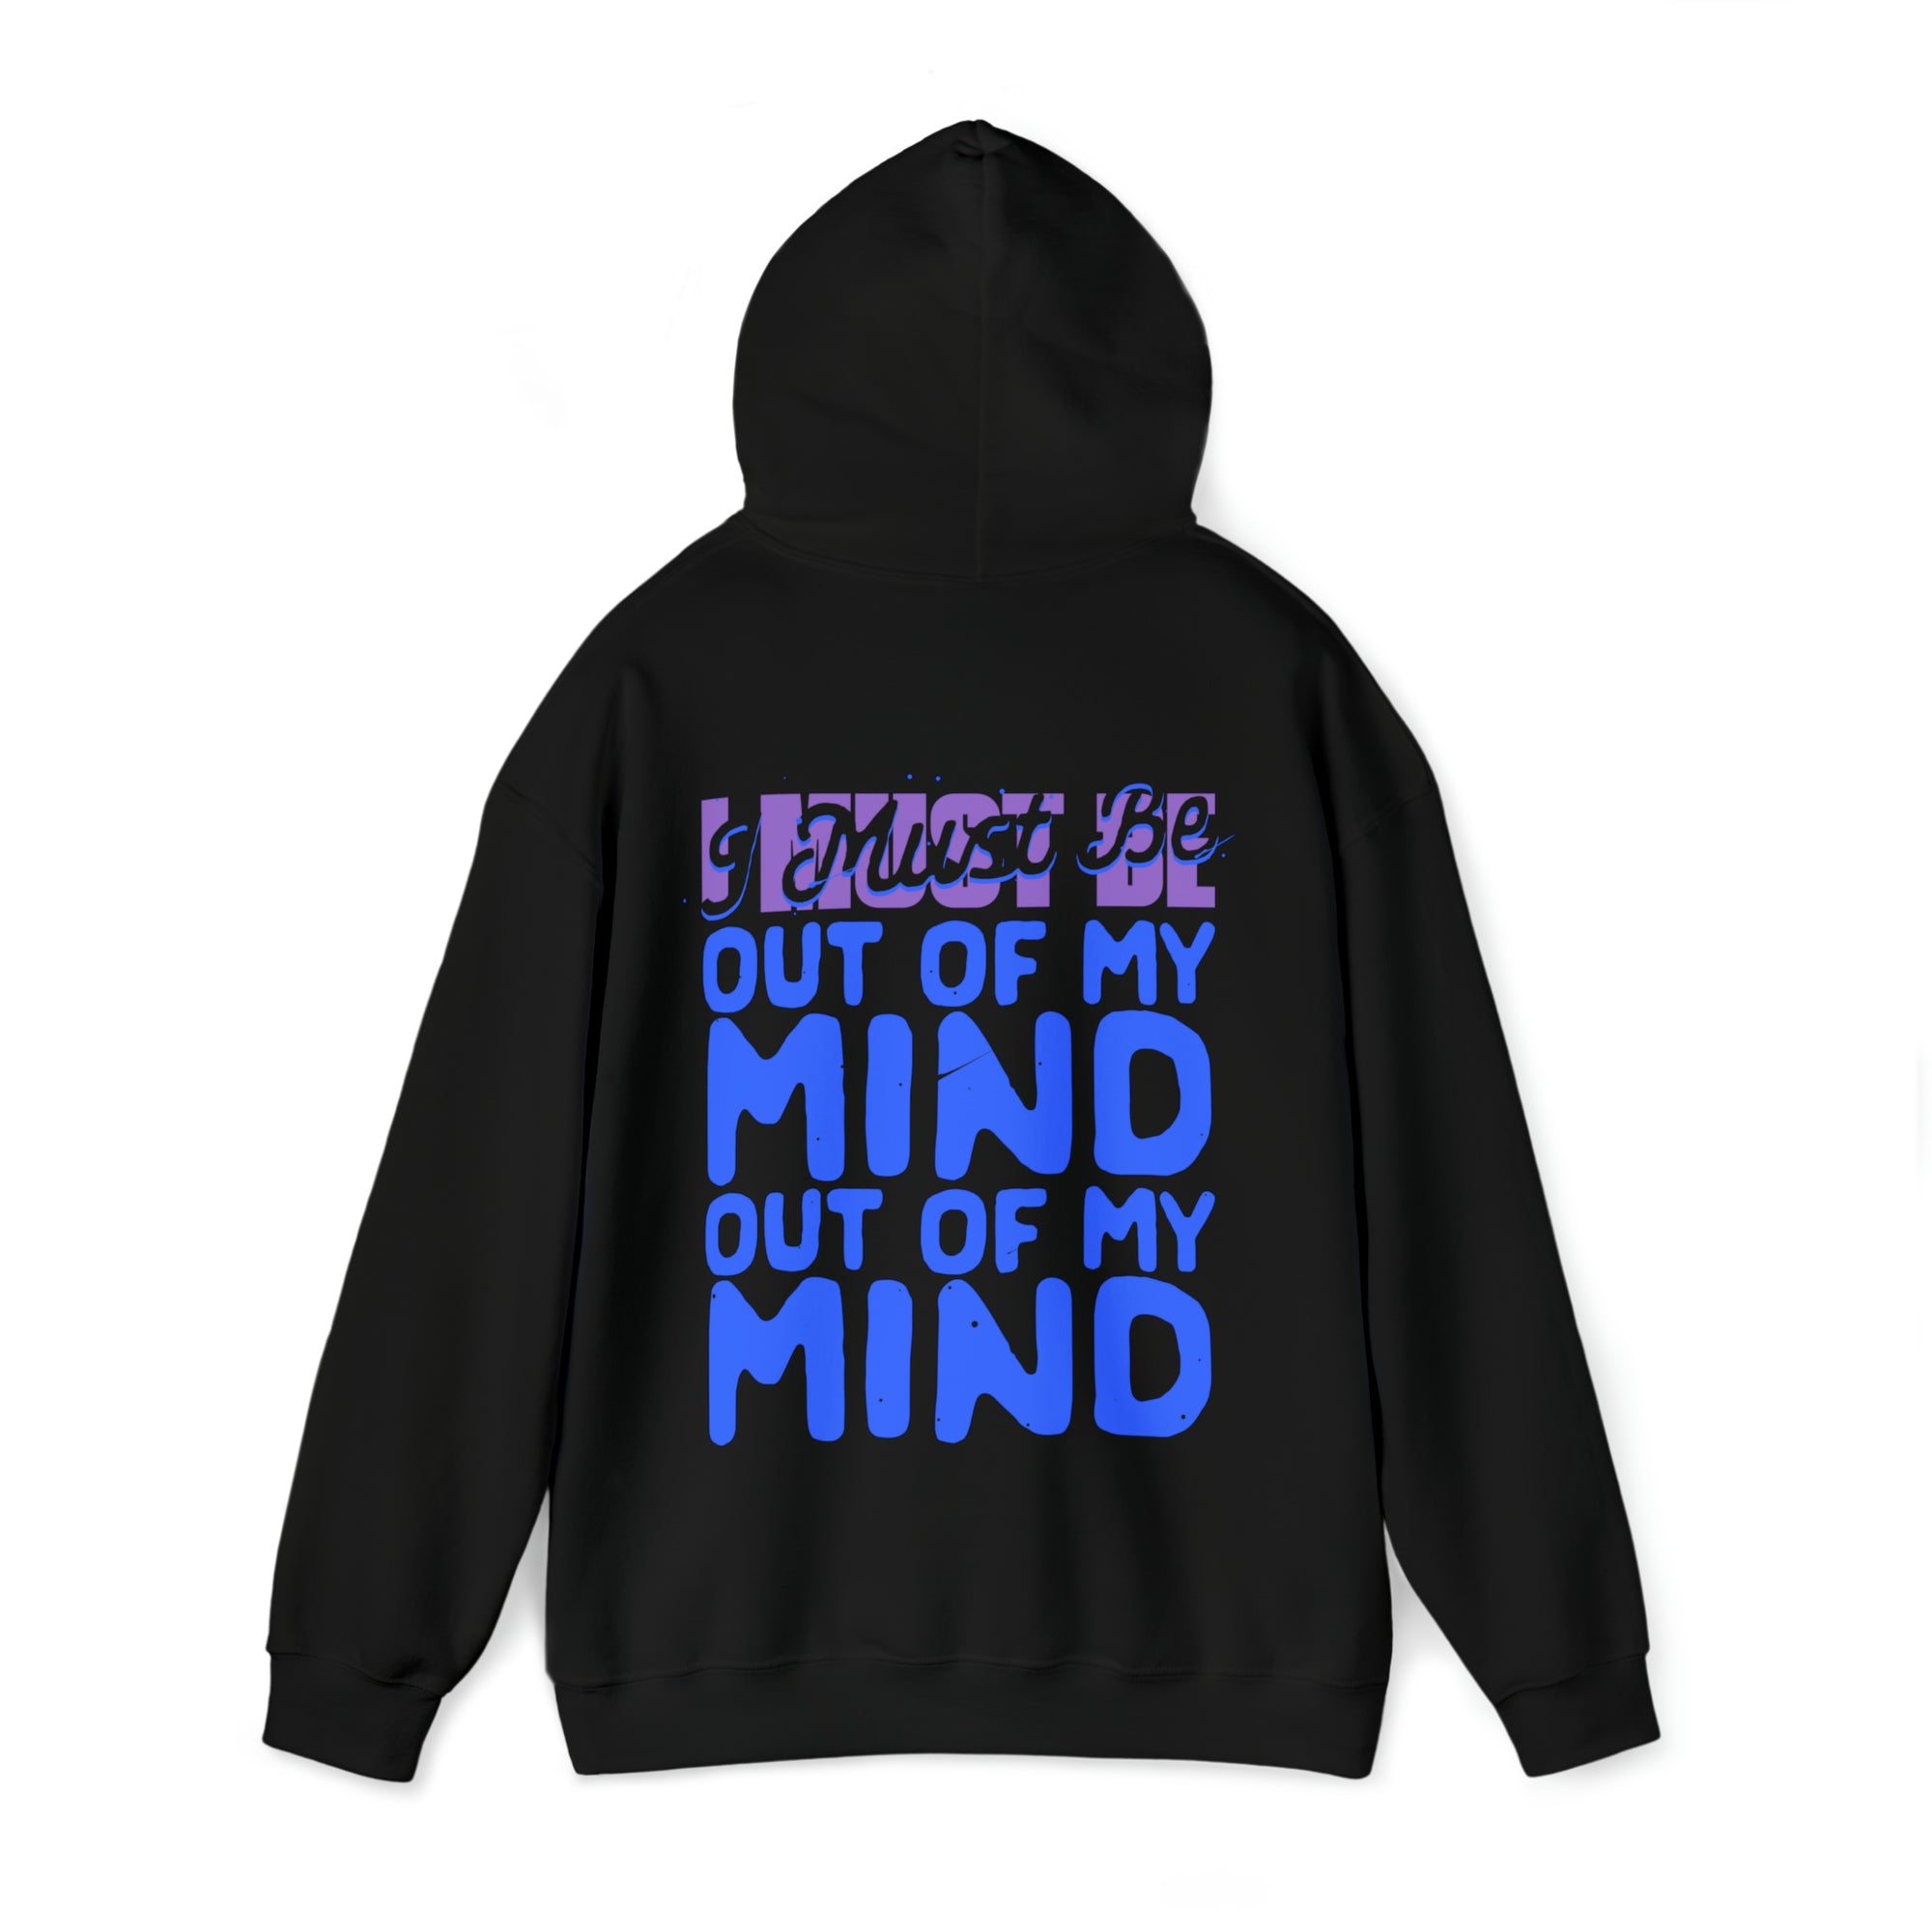 Out Of My Mind Hoodie - Adult